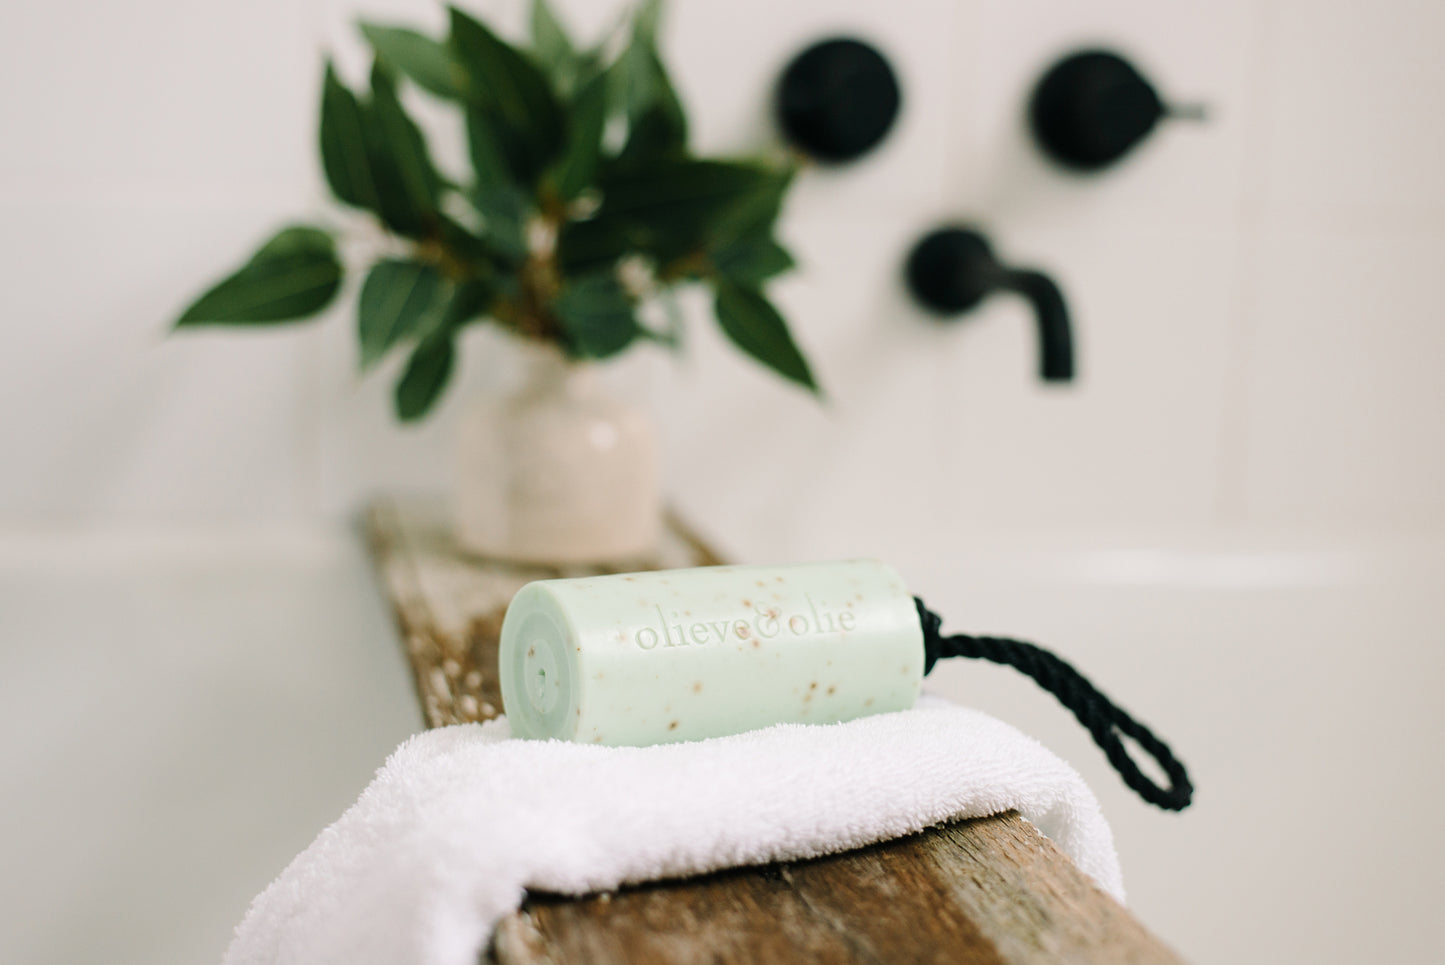 Soap on a Rope Peppermint & Coffee